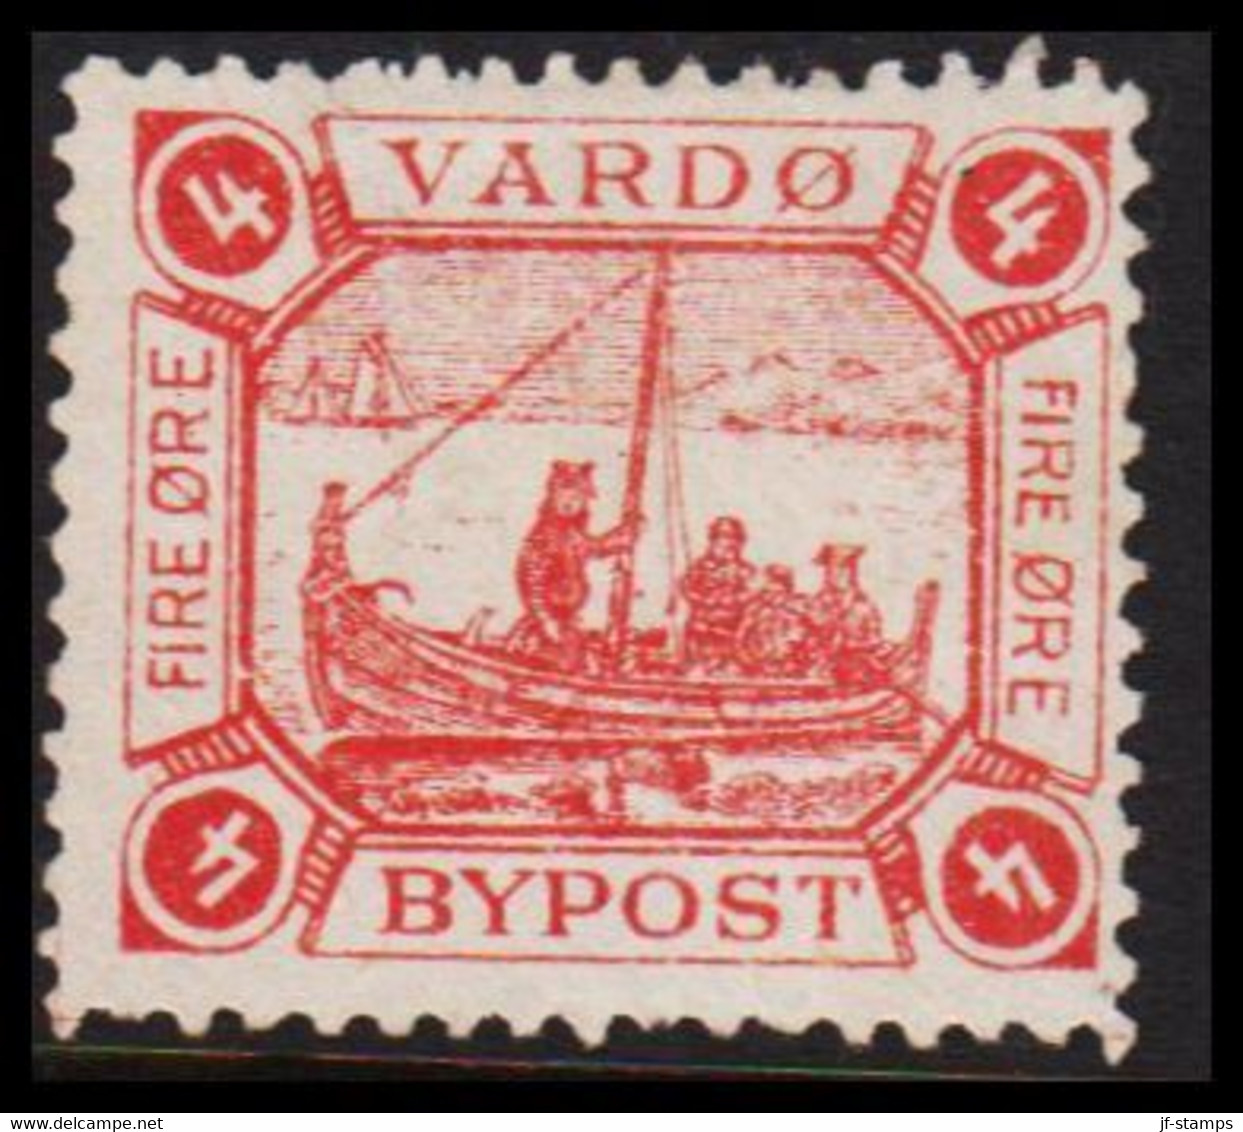 1888. NORGE. VARDØ BYPOST FIRE ØRE. No Gum. Small Fold. - JF529836 - Local Post Stamps